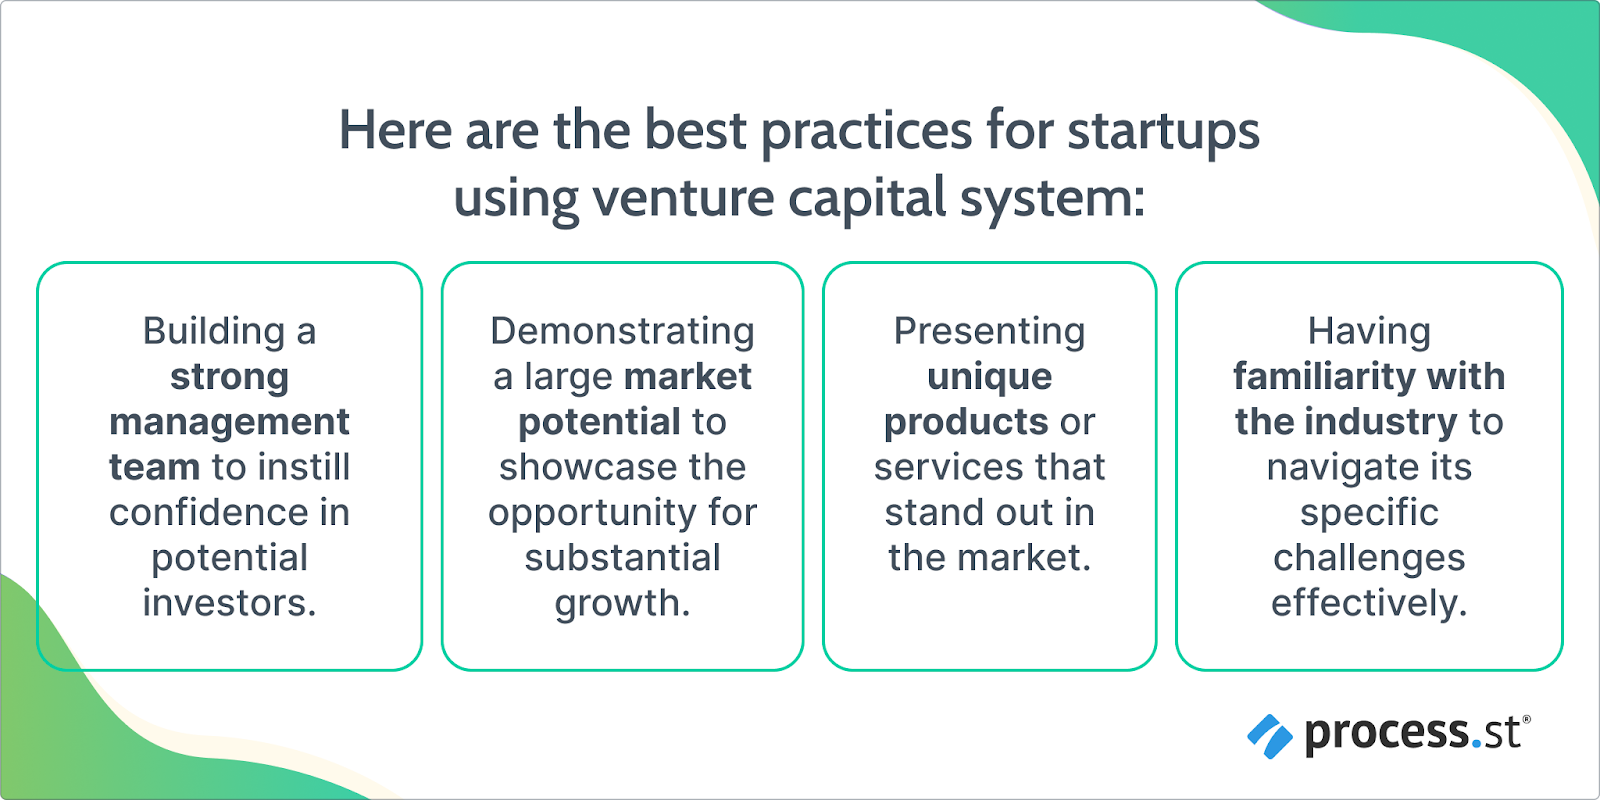 Image showing the best practices for startups using a venture capital system